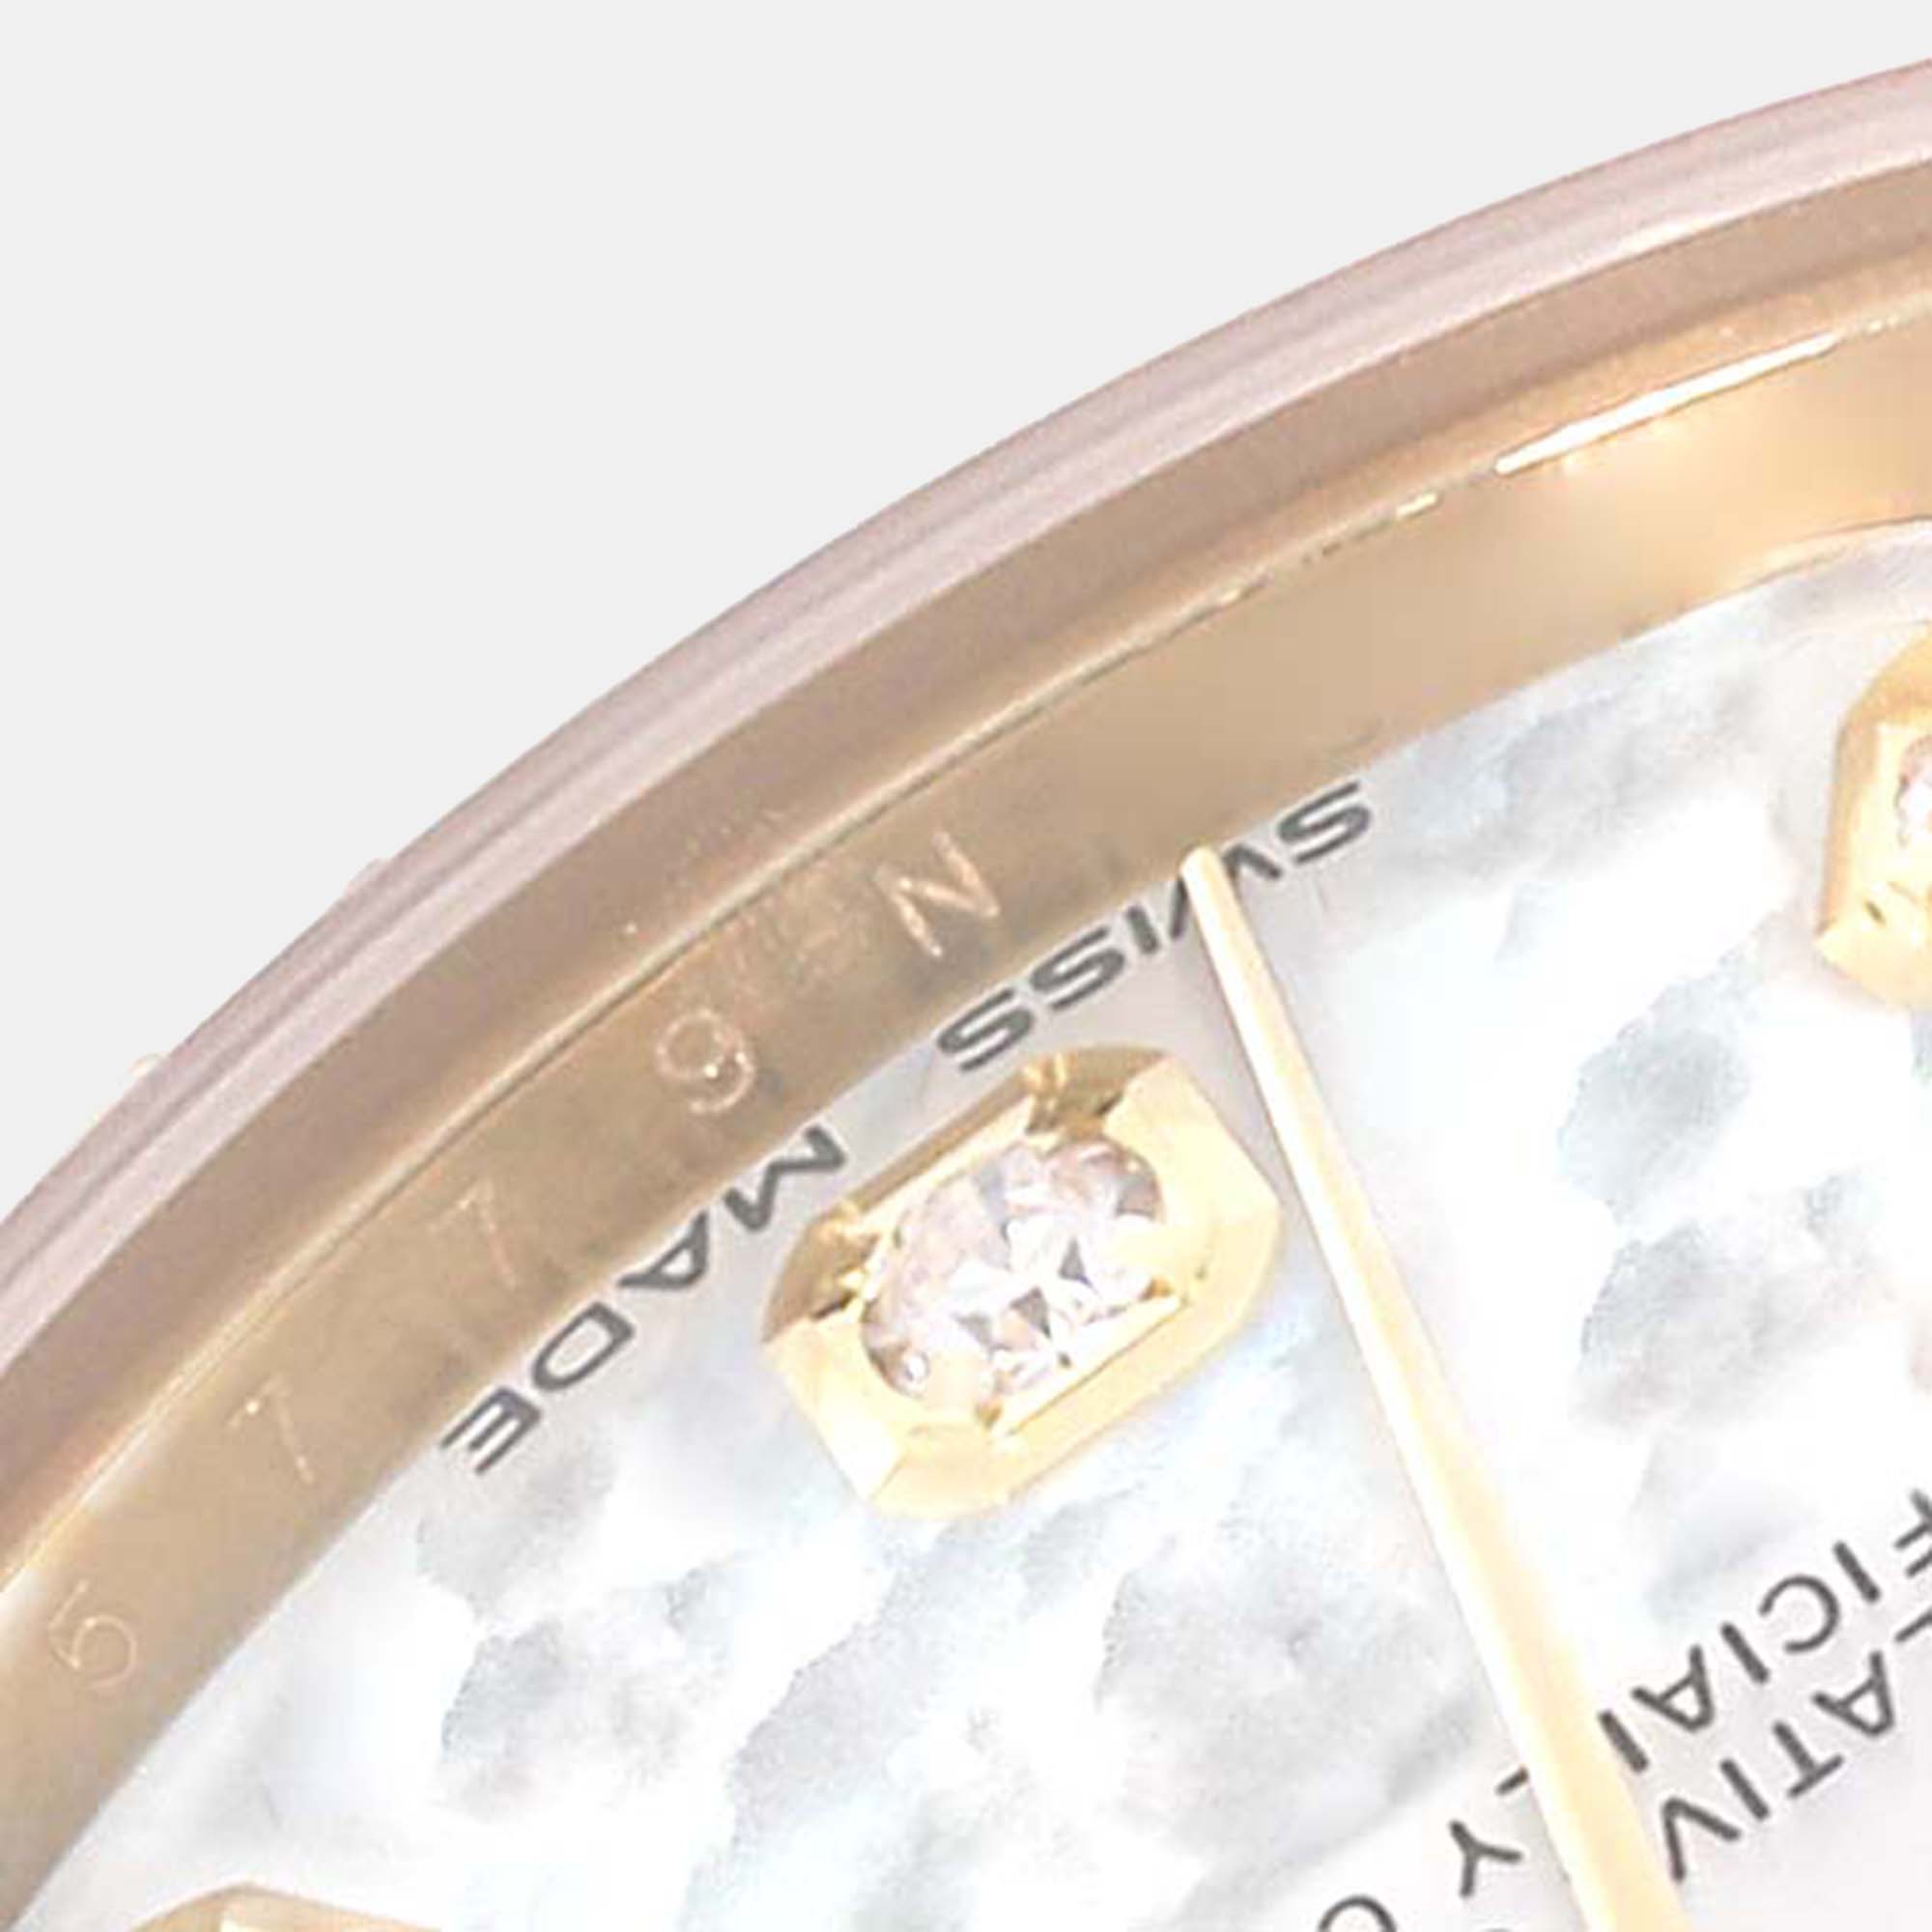 Rolex President Midsize Yellow Gold Mother Of Pearl Diamond Dial Ladies Watch 178278 31 Mm